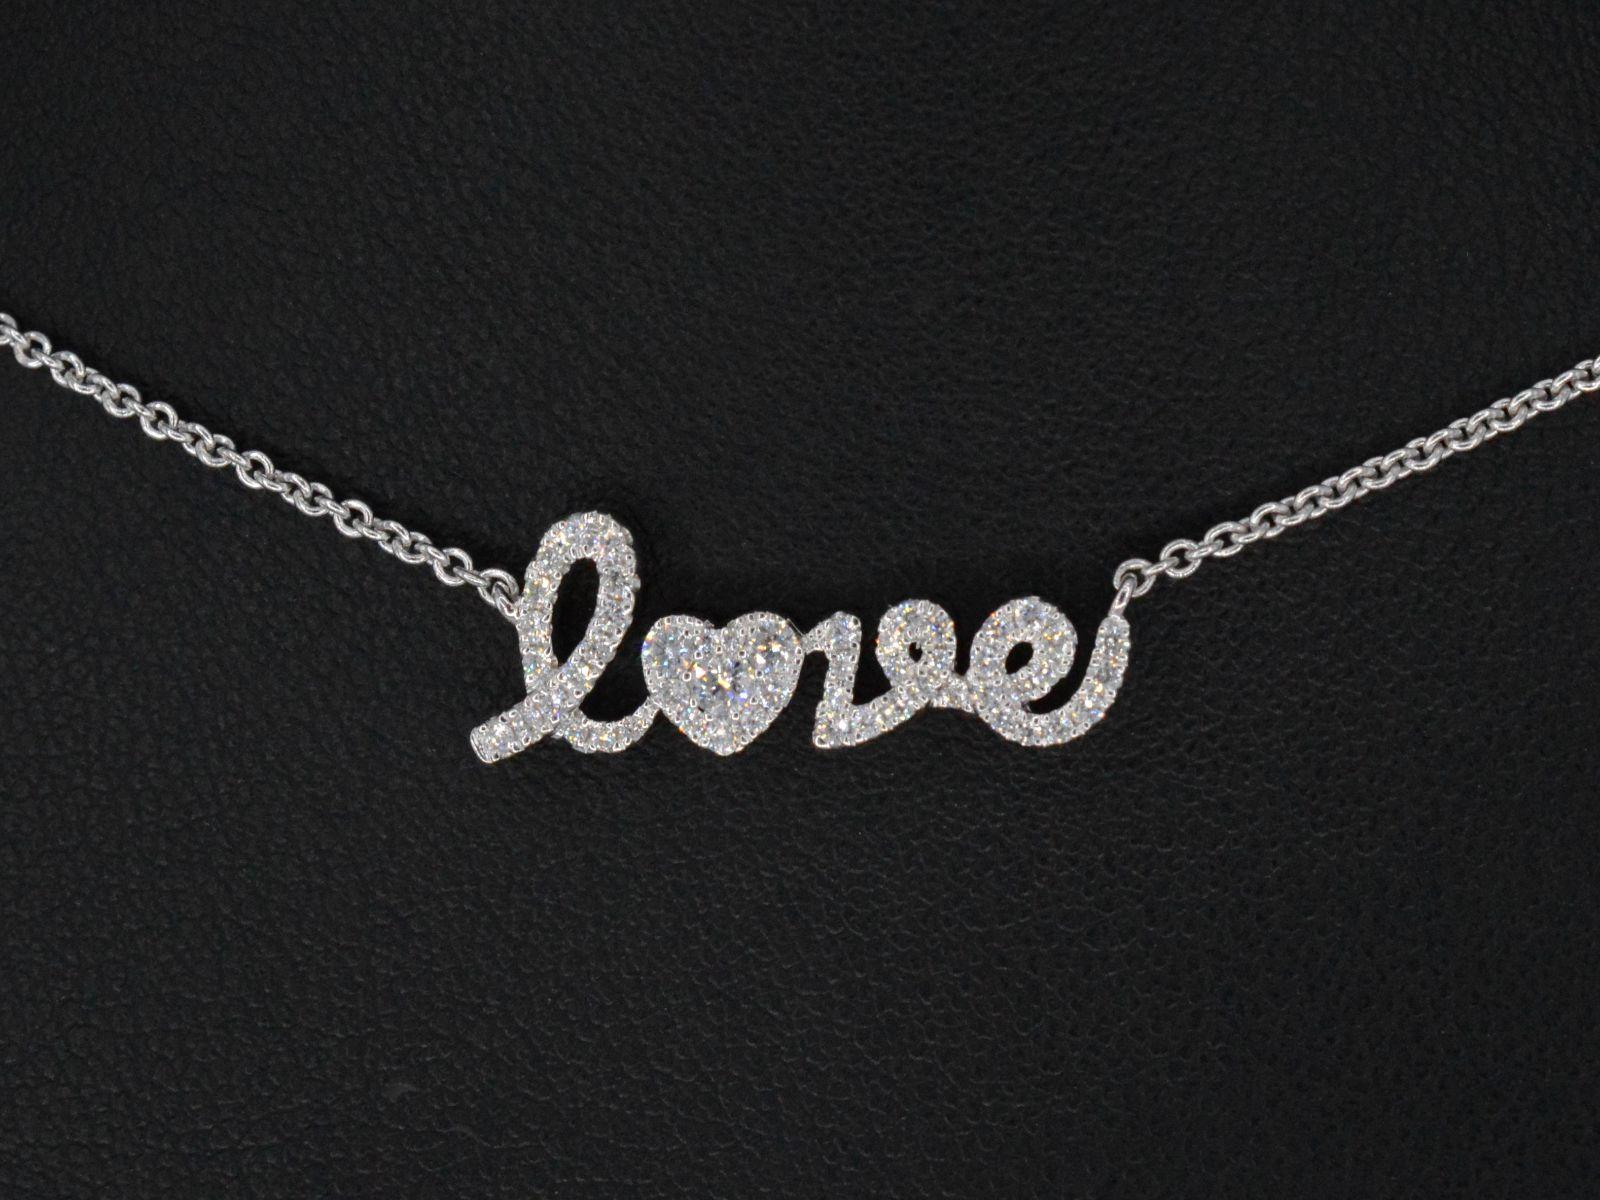 Introducing the exquisite 'Love' Necklace, a dazzling fusion of elegance and sentimentality. This resplendent piece features 52 meticulously crafted diamonds, totaling 0.50 carats. The diamonds boast a brilliant cut, showcasing their extraordinary